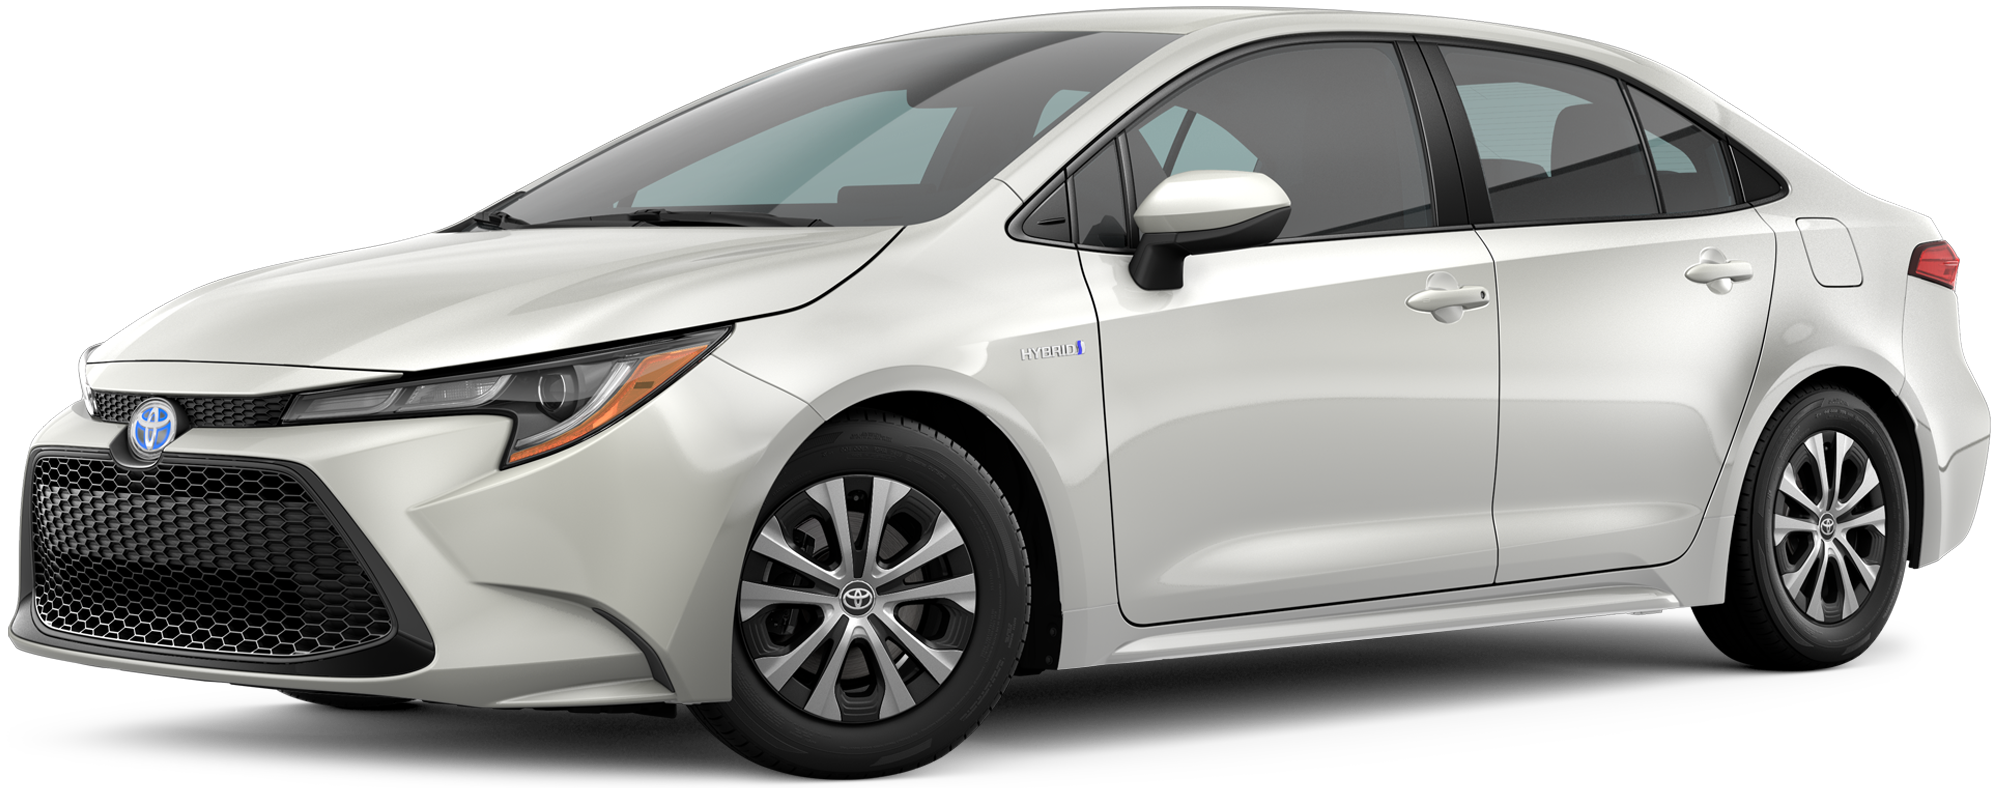 2020 Toyota Corolla Hybrid Incentives, Specials & Offers in North Brunswick  Township NJ